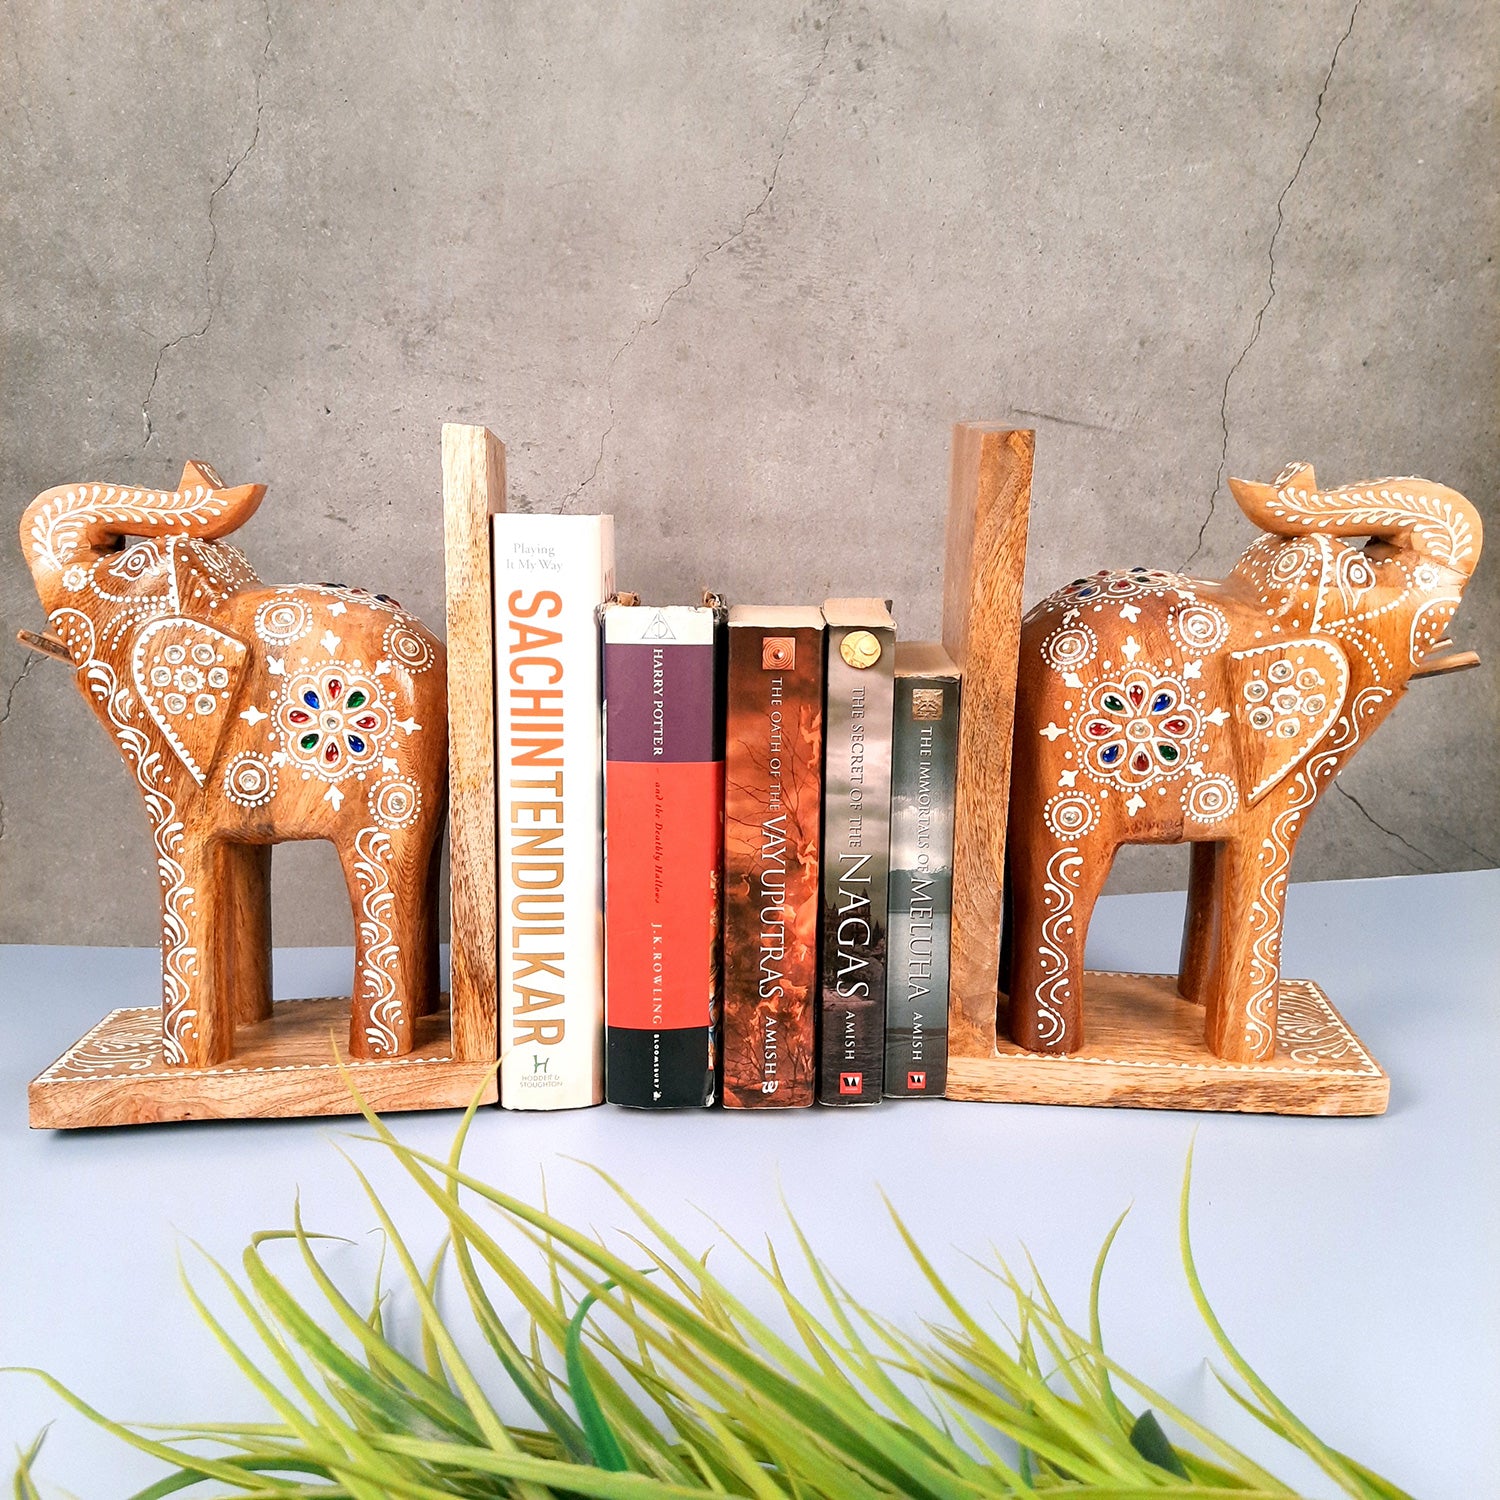 Book Ends - Wooden Elephant Design | Book Holders Stand | Bookend Desk Organizer - For Home, Table, Desk, Office, Study Kids Room & Gifts - 14 Inch - apkamart